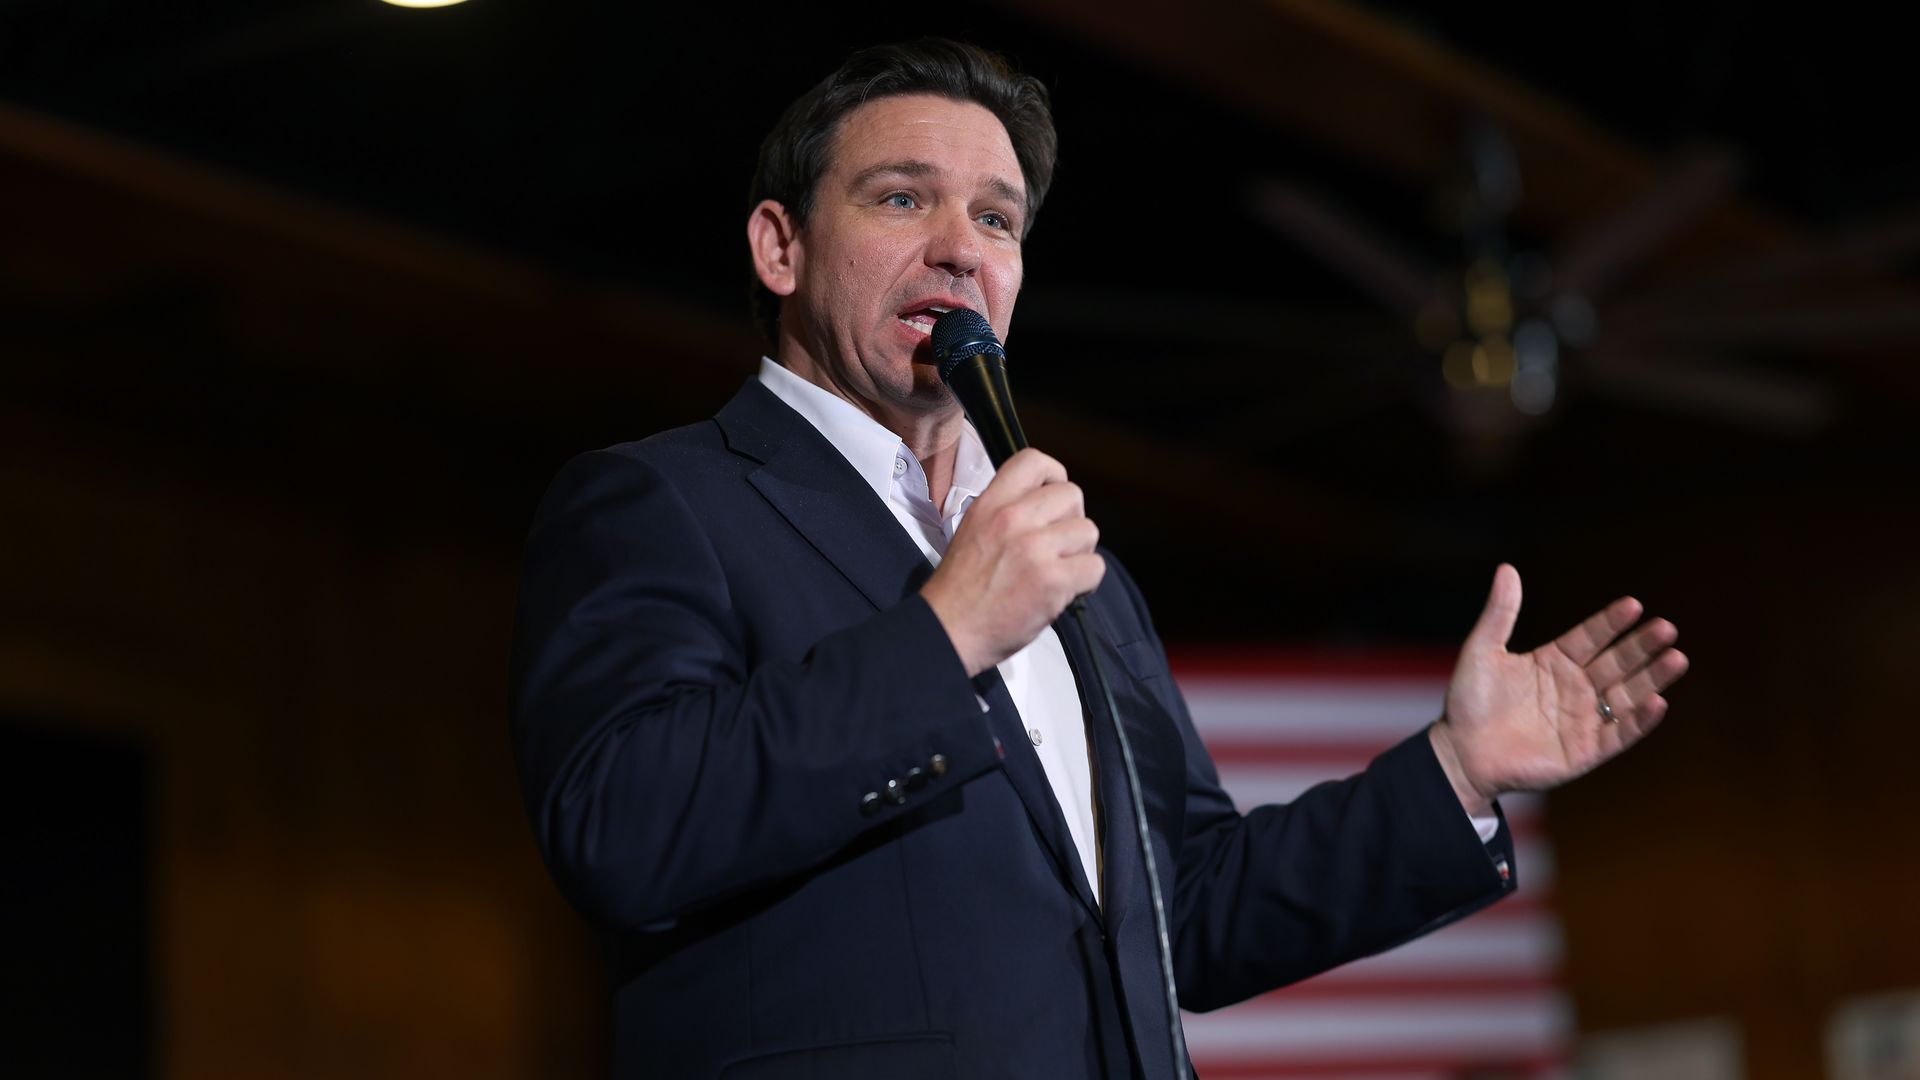 Republican presidential candidate Florida Governor Ron DeSantis speaks at a campaign event at Jethro's BBQ on January 11, 2024 in Ames, Iowa.